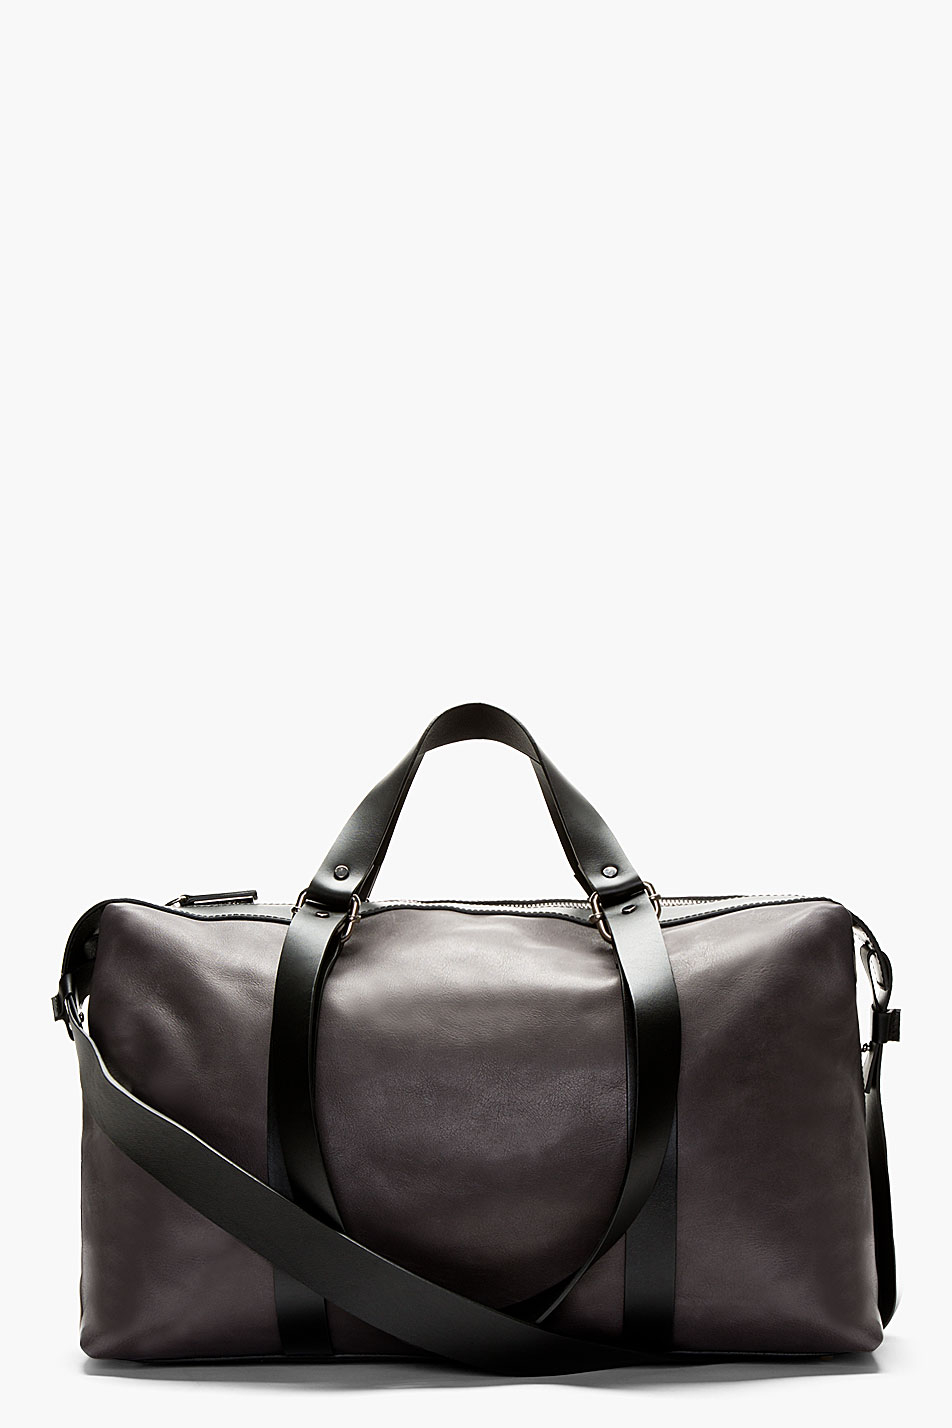 Lyst - Costume National Grey Leather Duffle Bag in Gray for Men